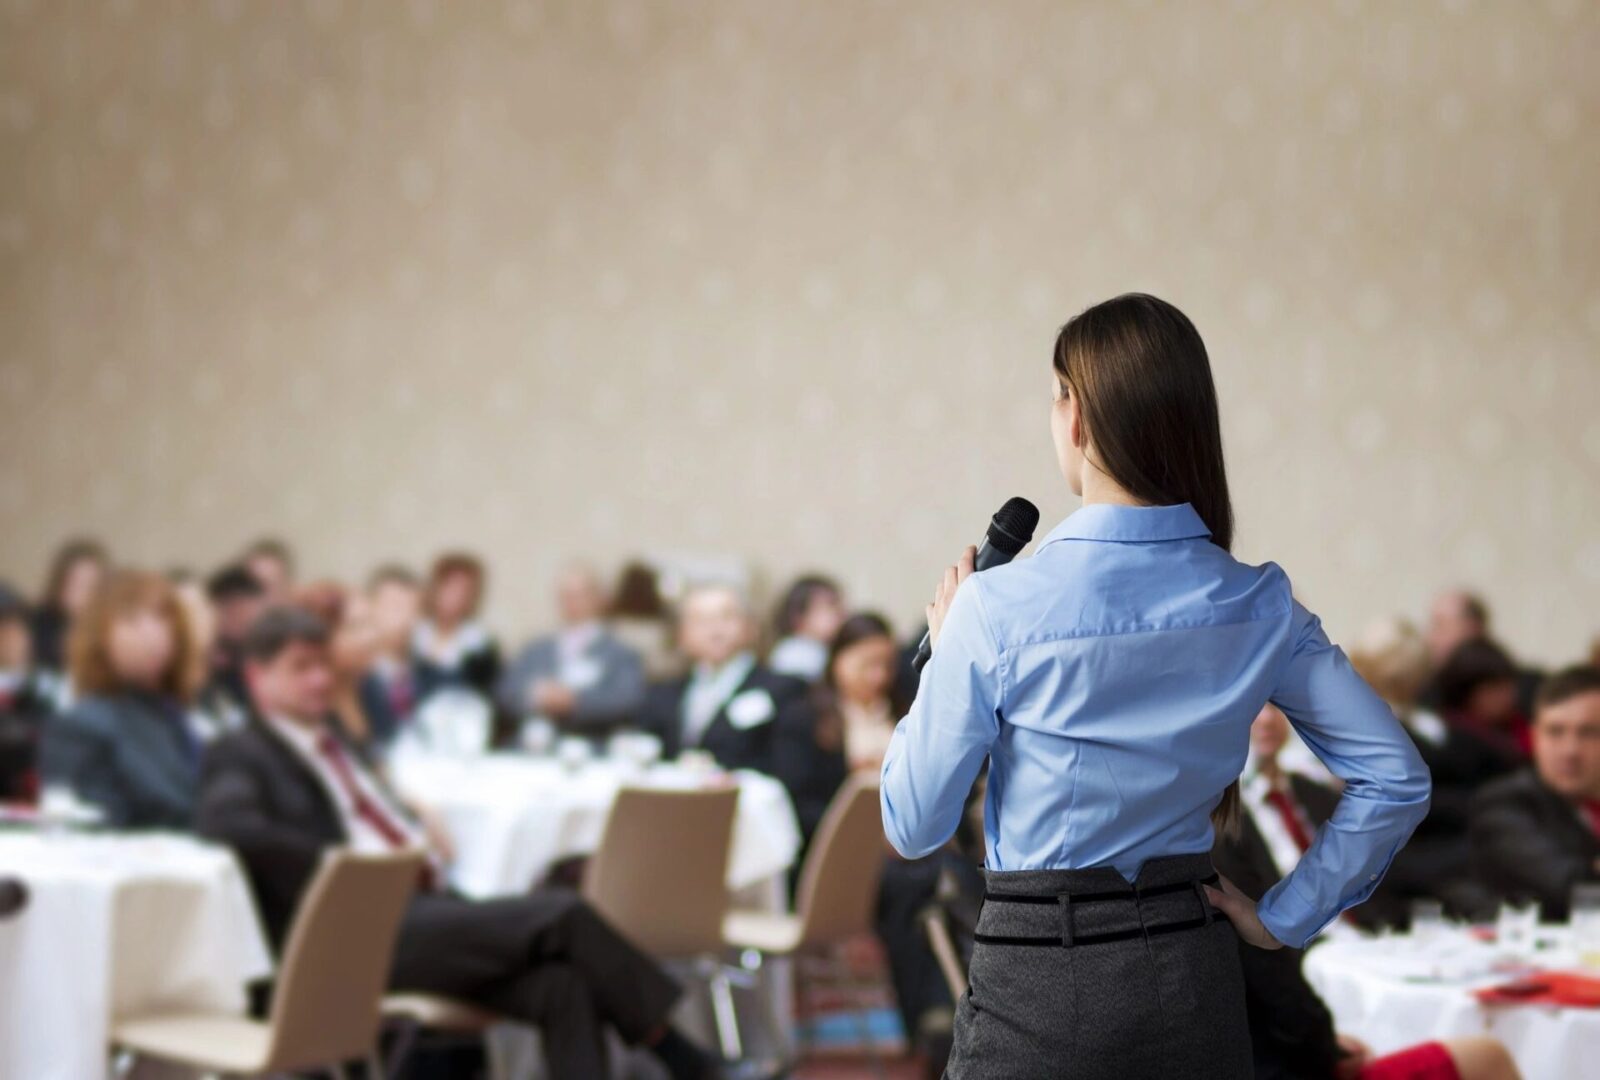 A woman is speaking to an audience at a conference.